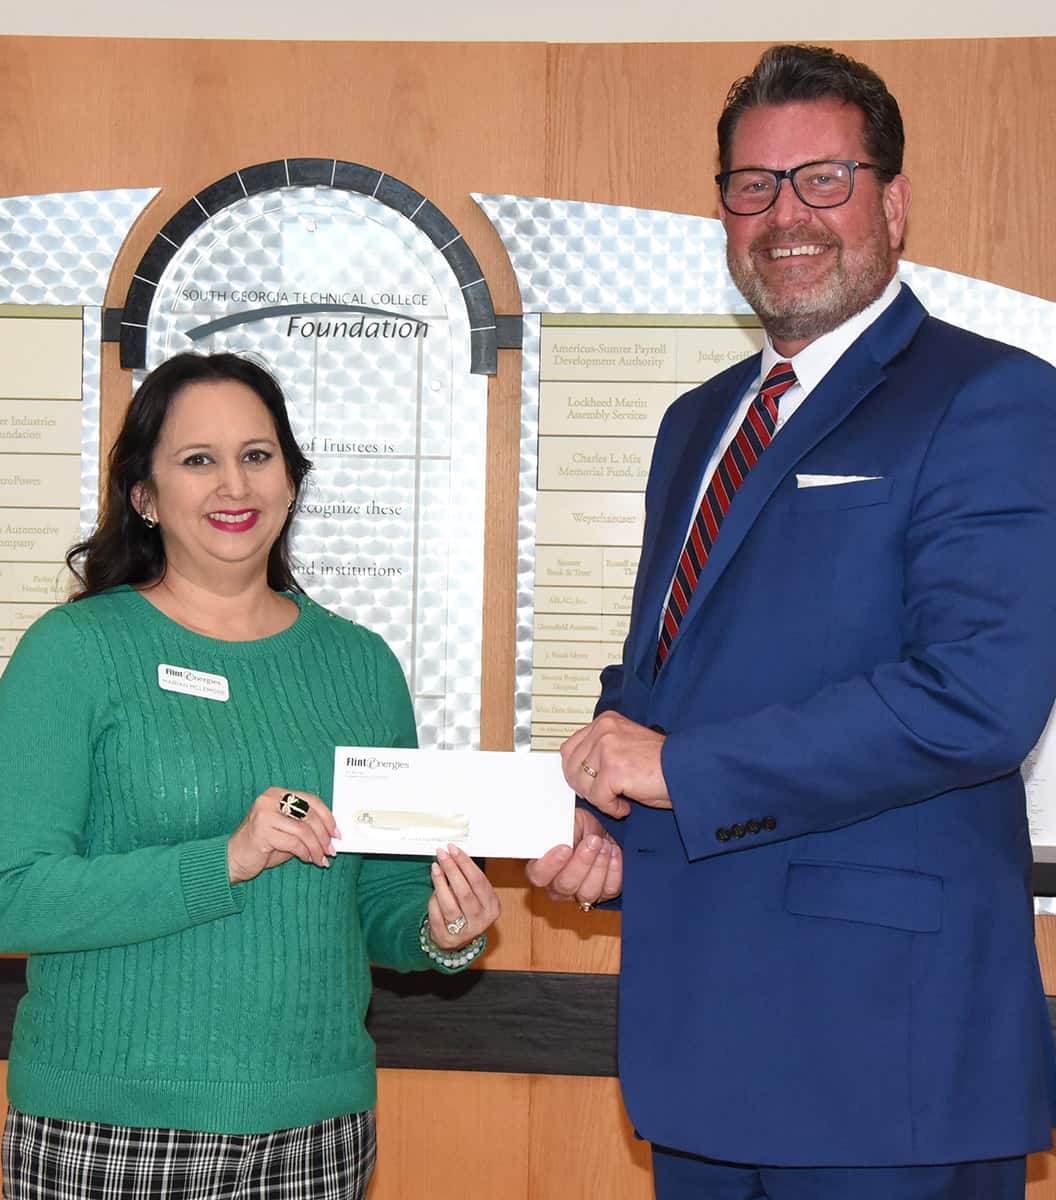 South Georgia Technical College President Dr. John Watford, (r), is show above accepting a donation for the SGTC Foundation from Marian McLemore, (l) Vice President of Cooperative Communications with Flint Energies.